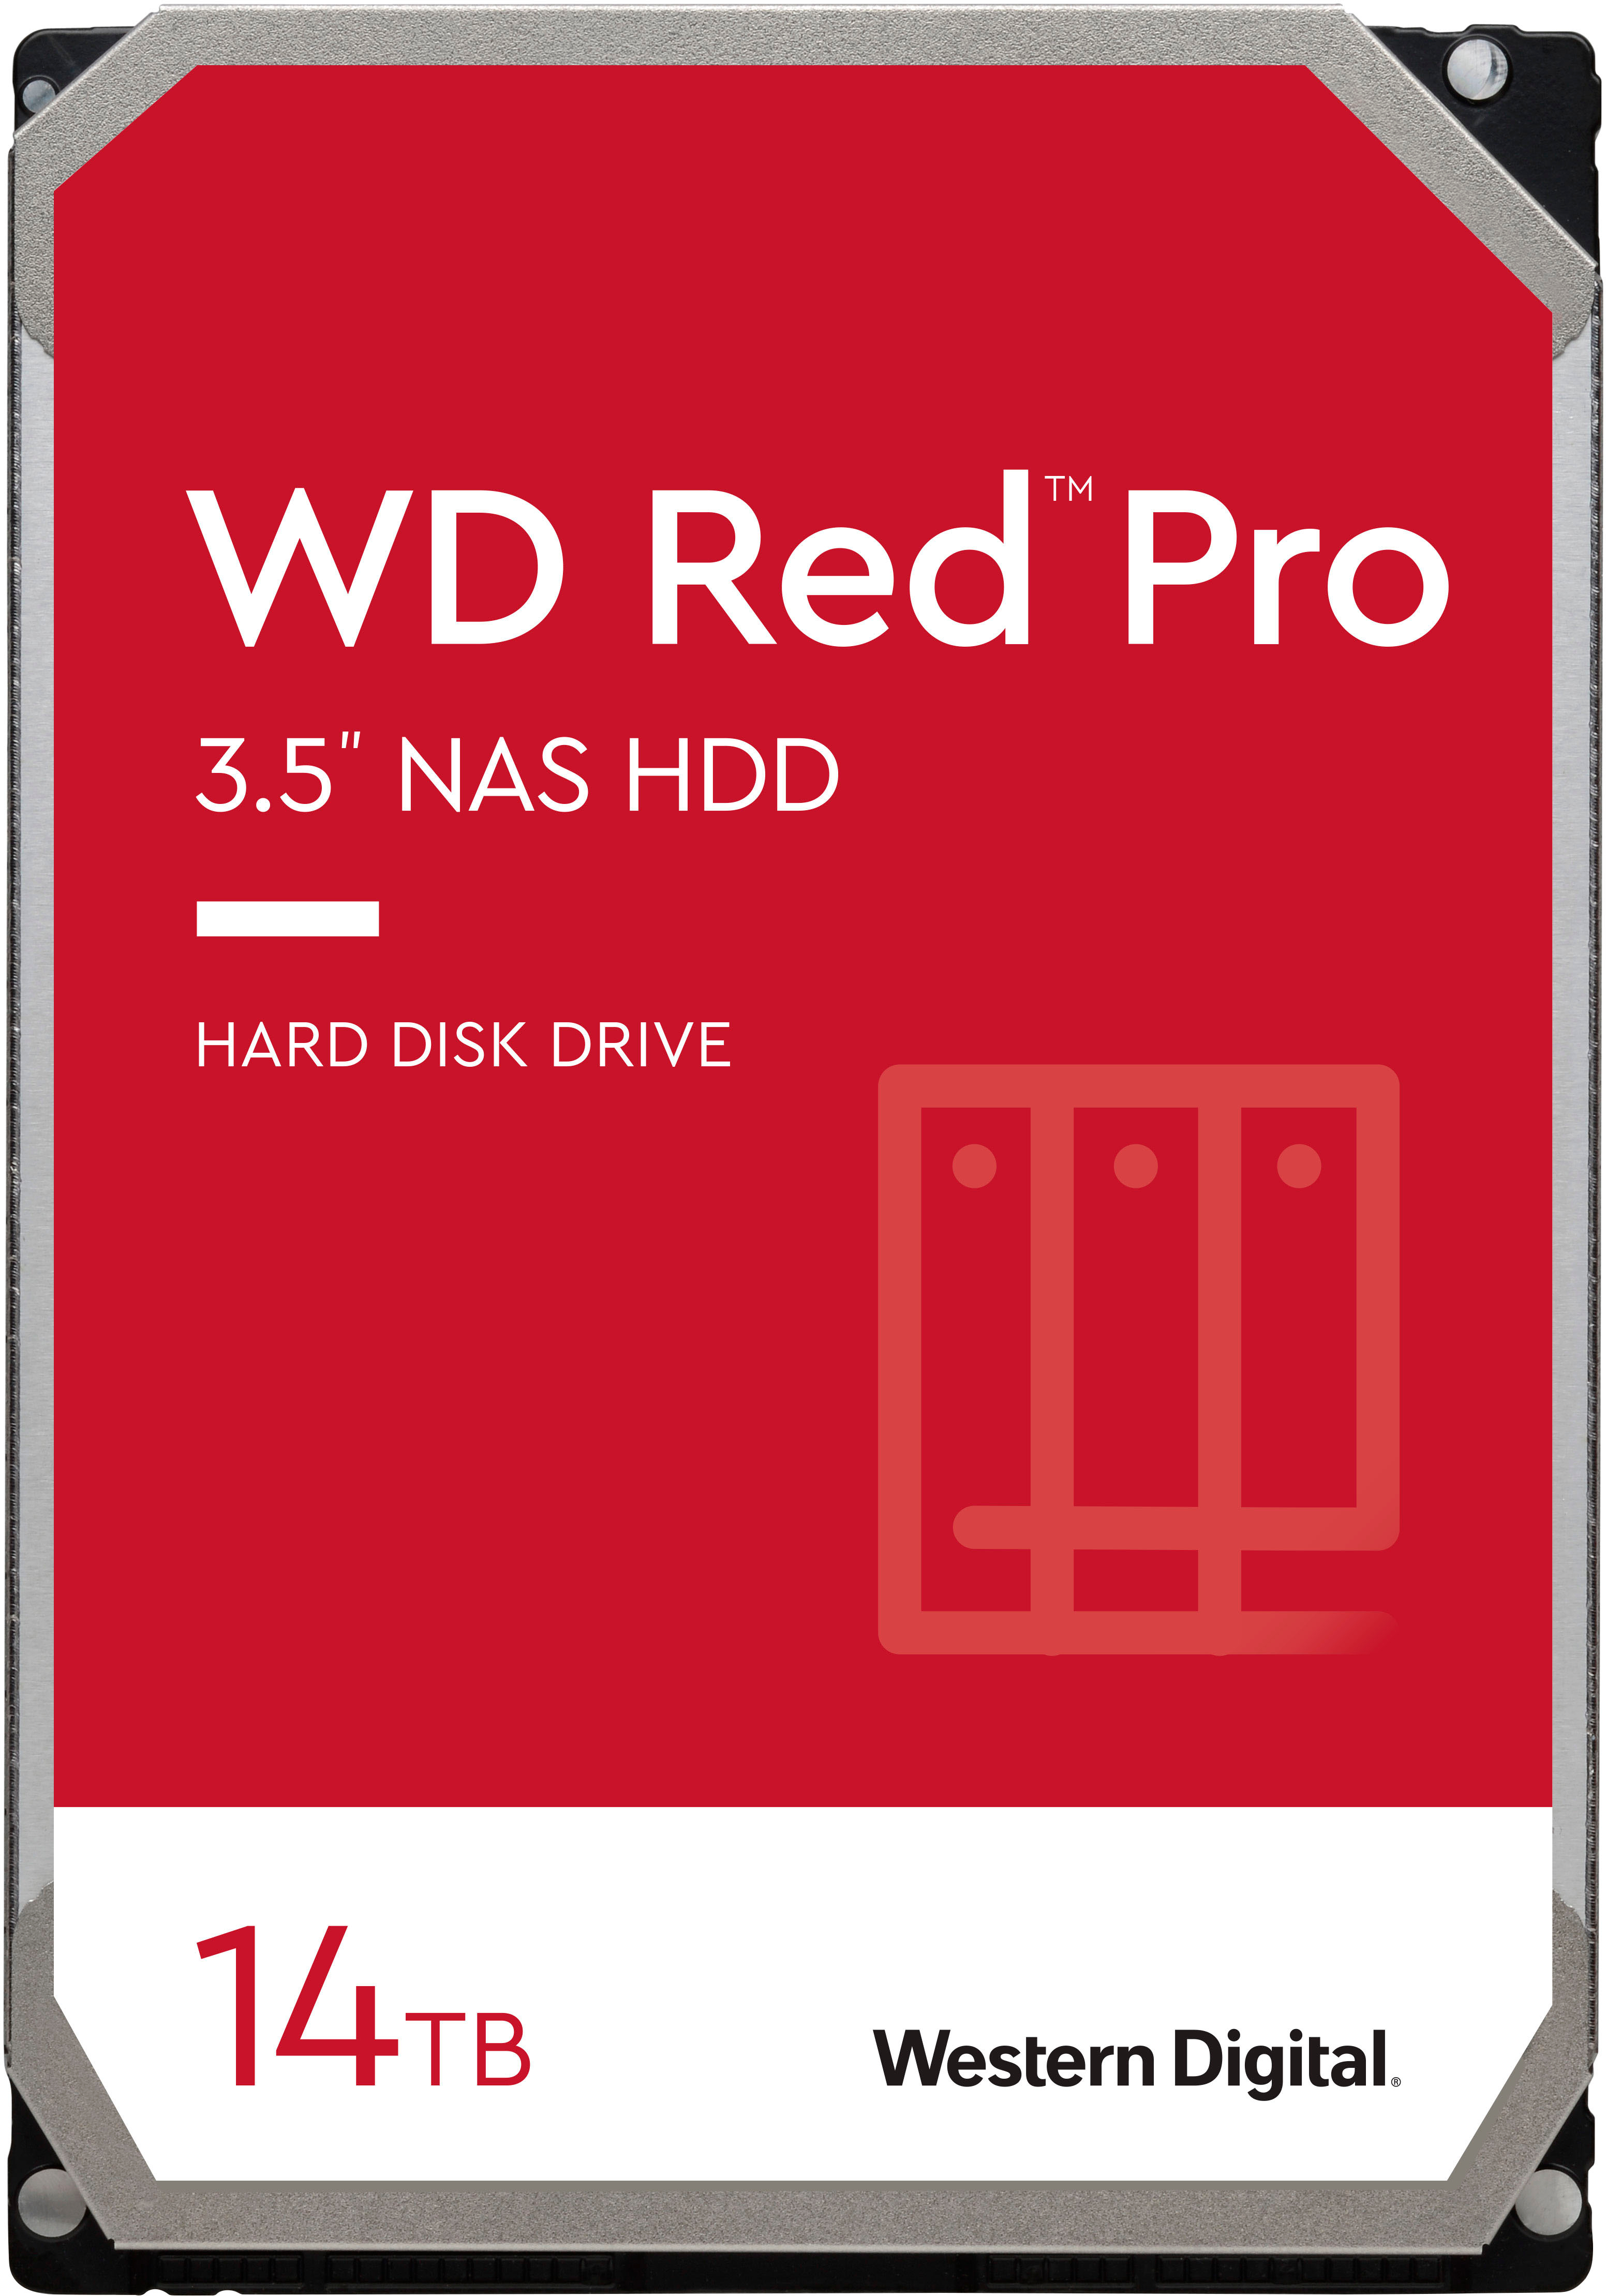 WD Red Western Digital NAS Hard Drive Unboxing & First Look Linus Tech Tips  